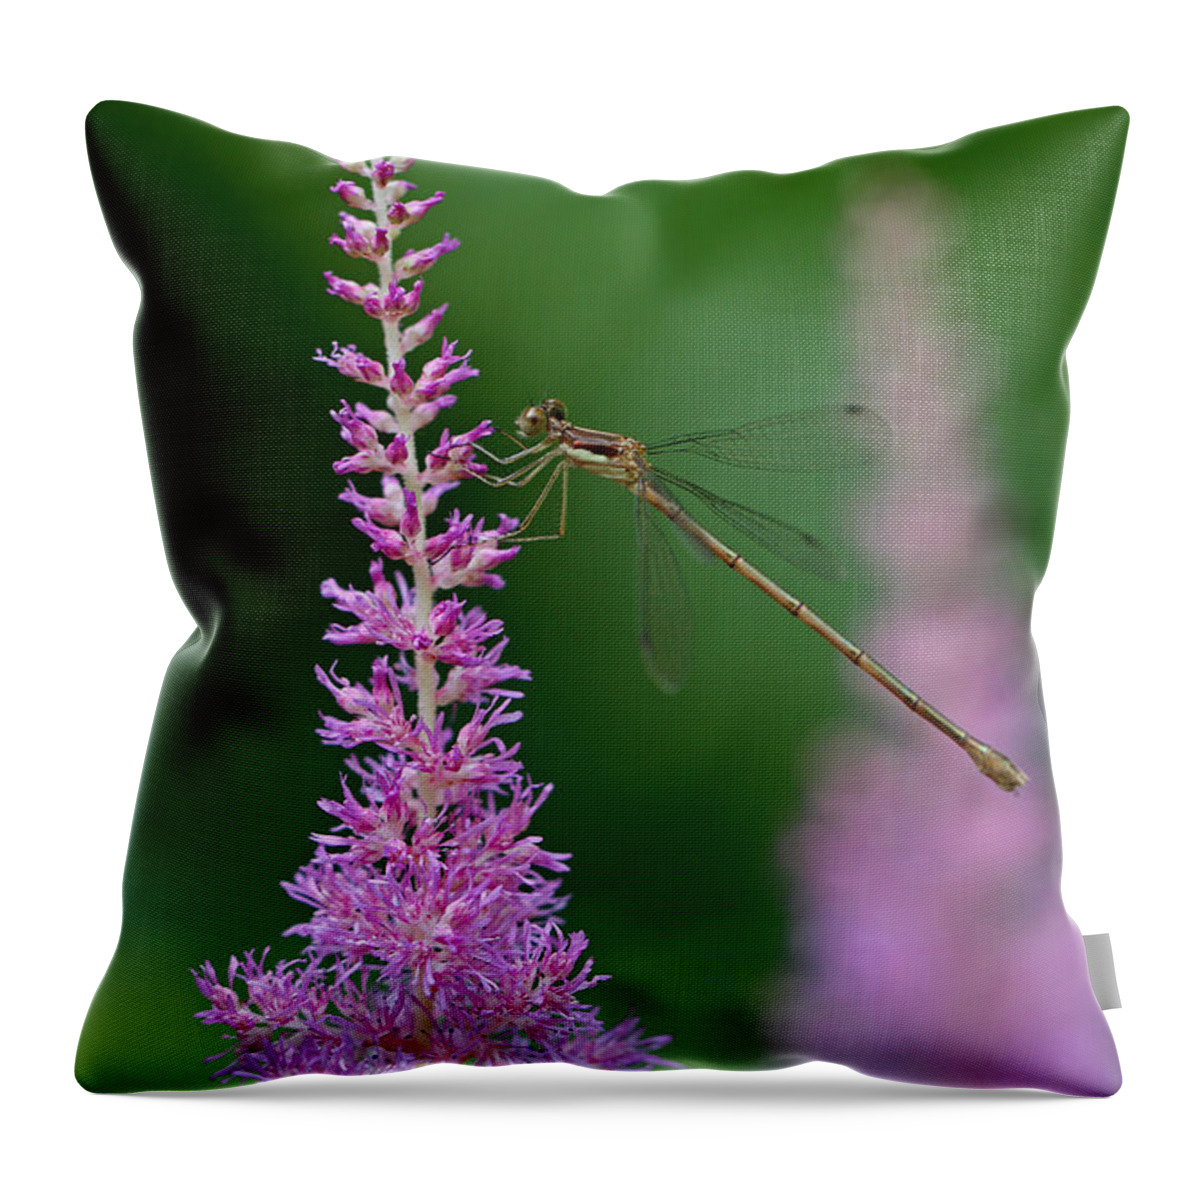 Damselfly Throw Pillow featuring the photograph Damselfly by Juergen Roth